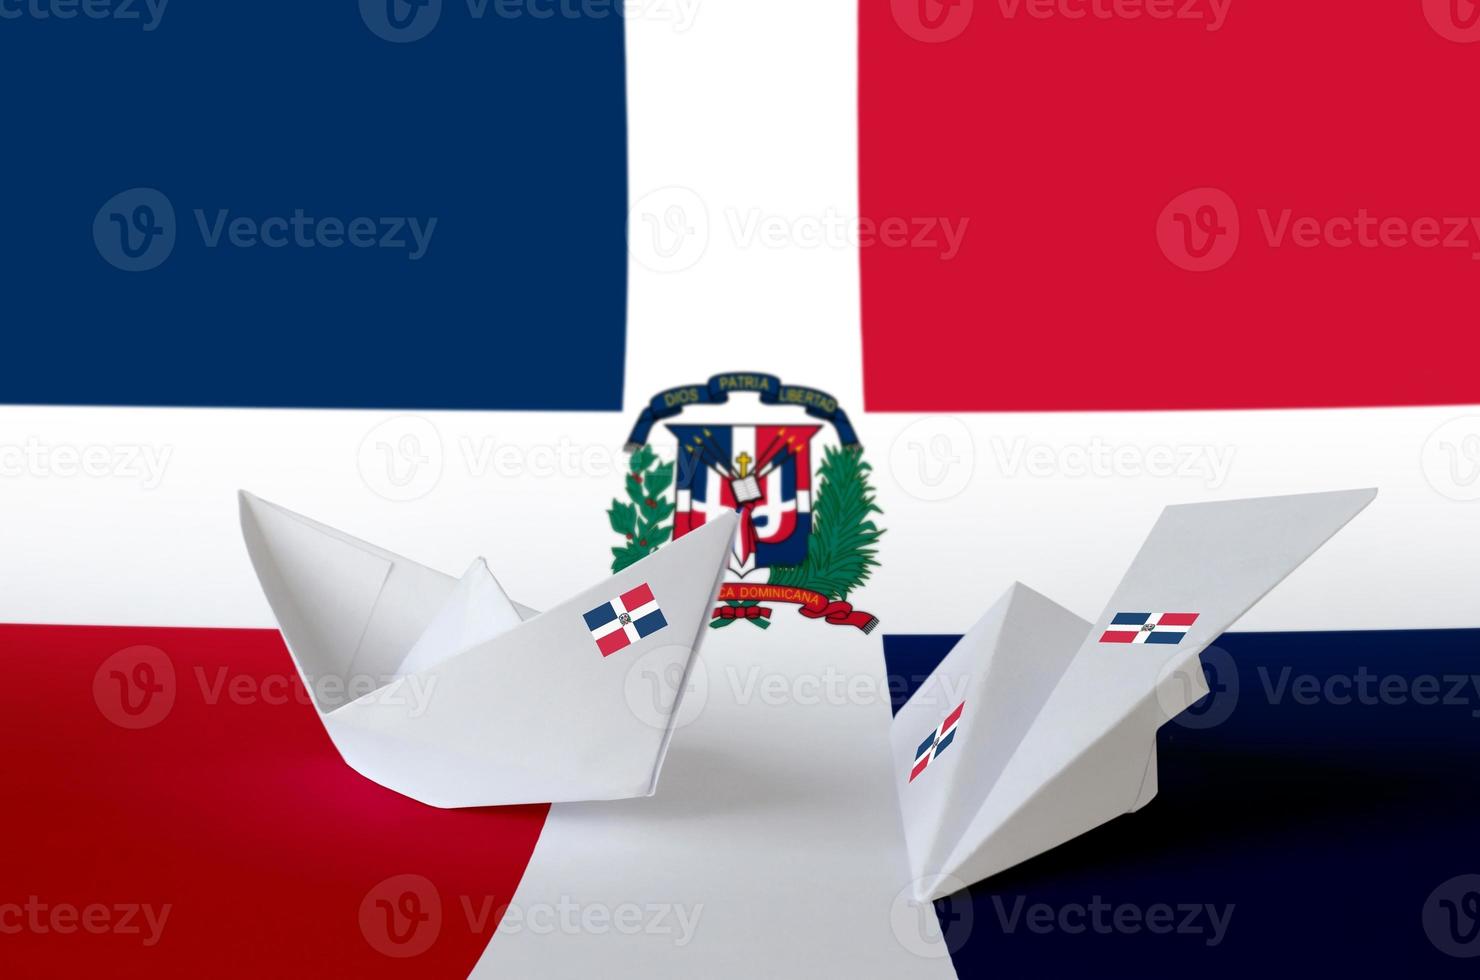 Dominican Republic flag depicted on paper origami airplane and boat. Handmade arts concept photo